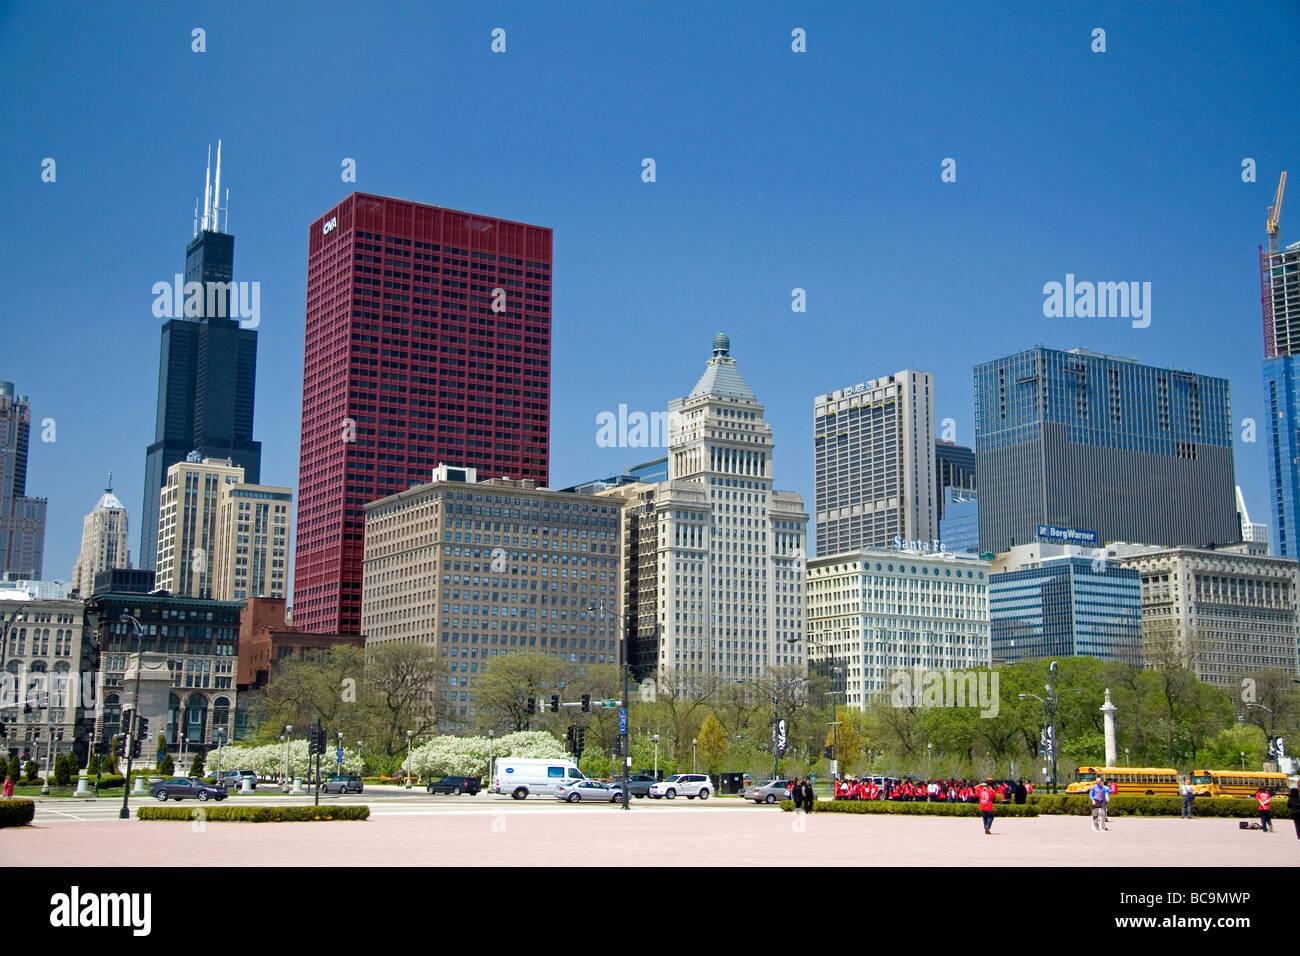 Grant Park located in the Loop community area of Chicago Illinois USA Stock Photo